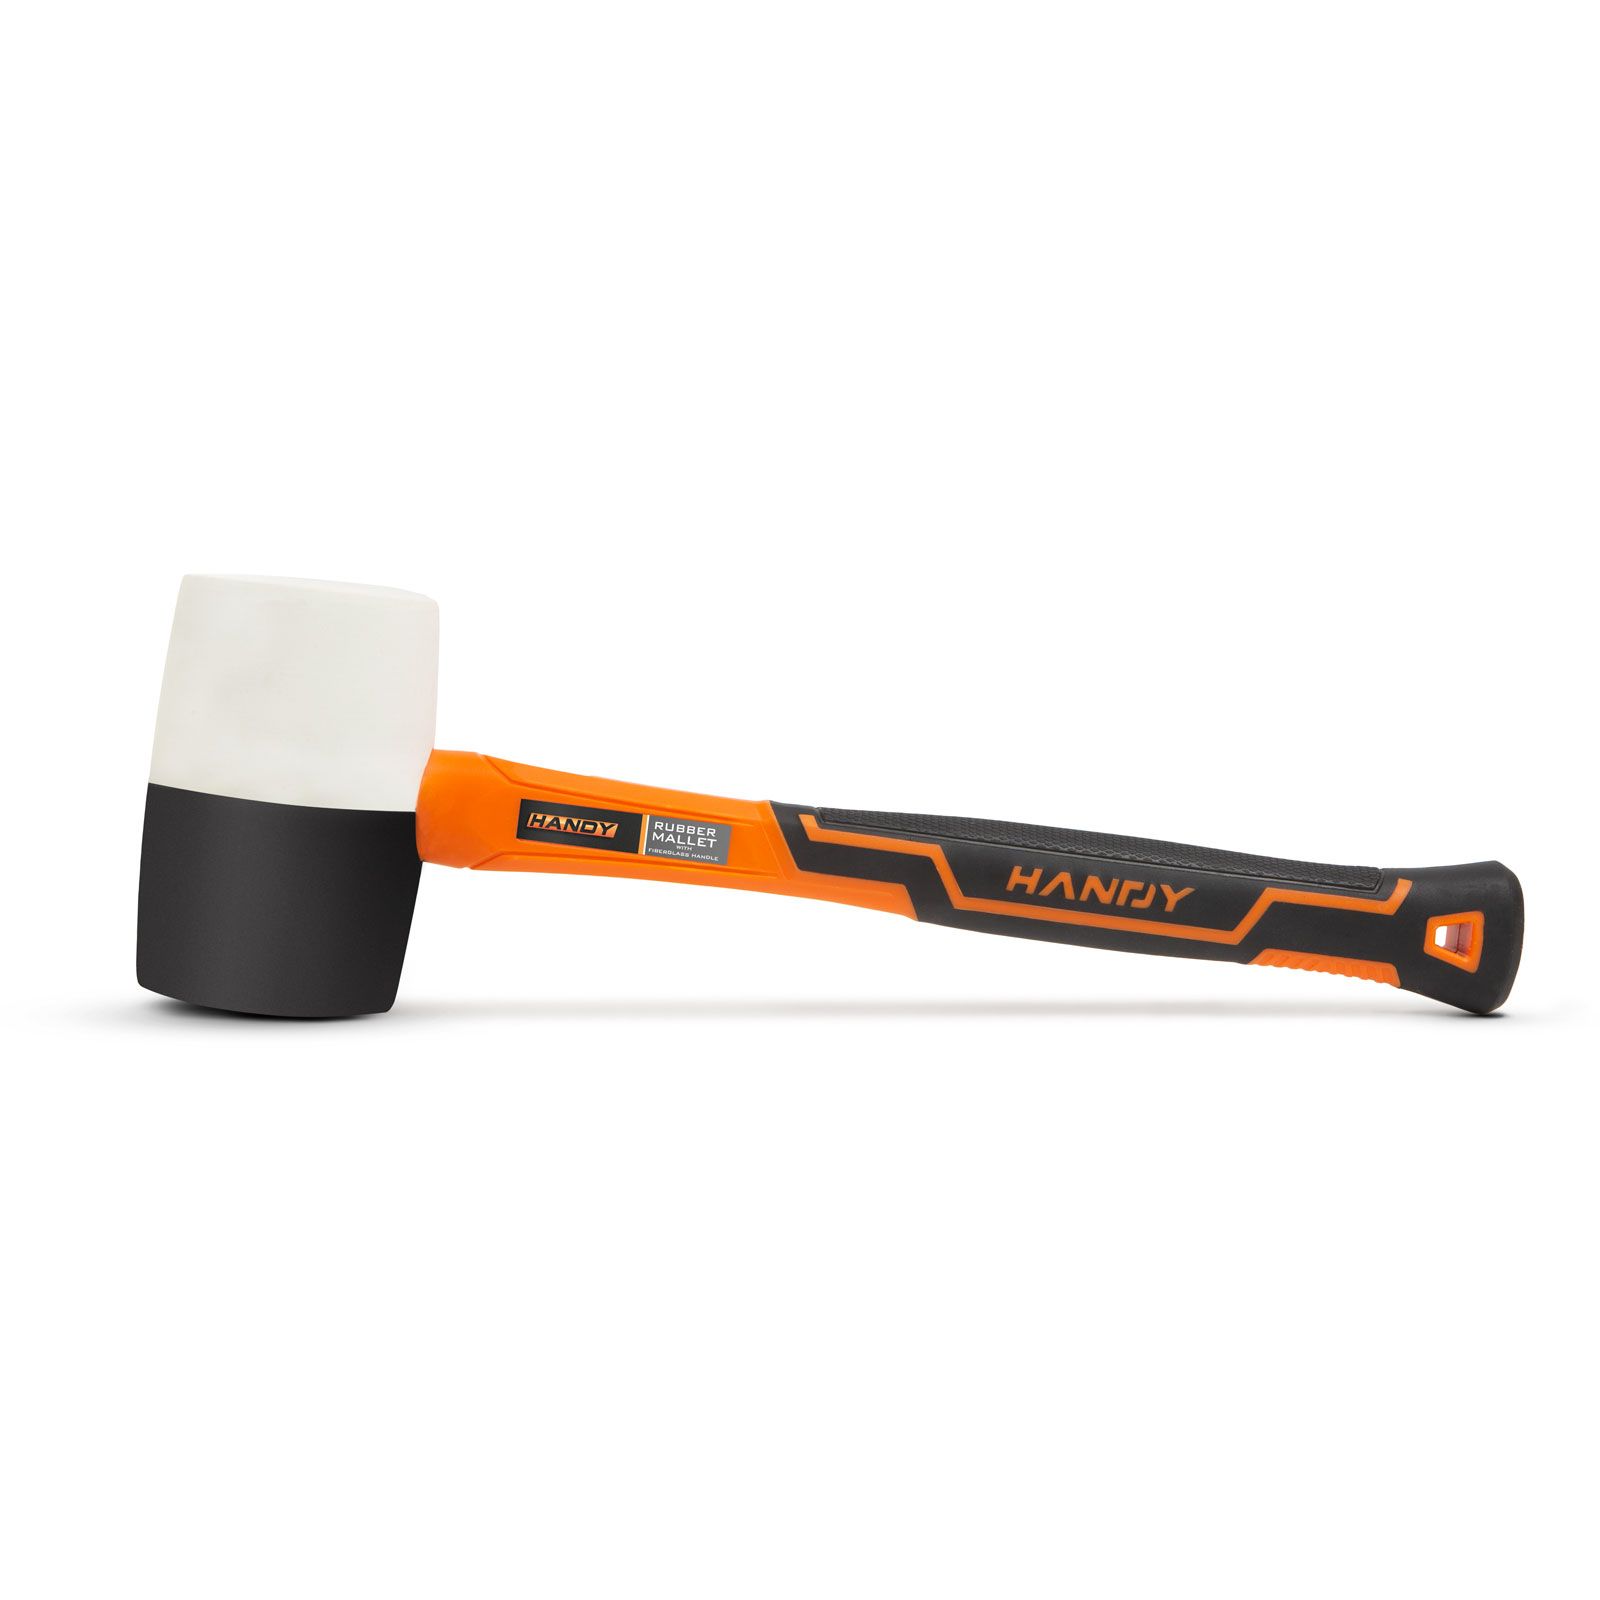 Rubber mallet with fiberglass handle - 907 g thumb